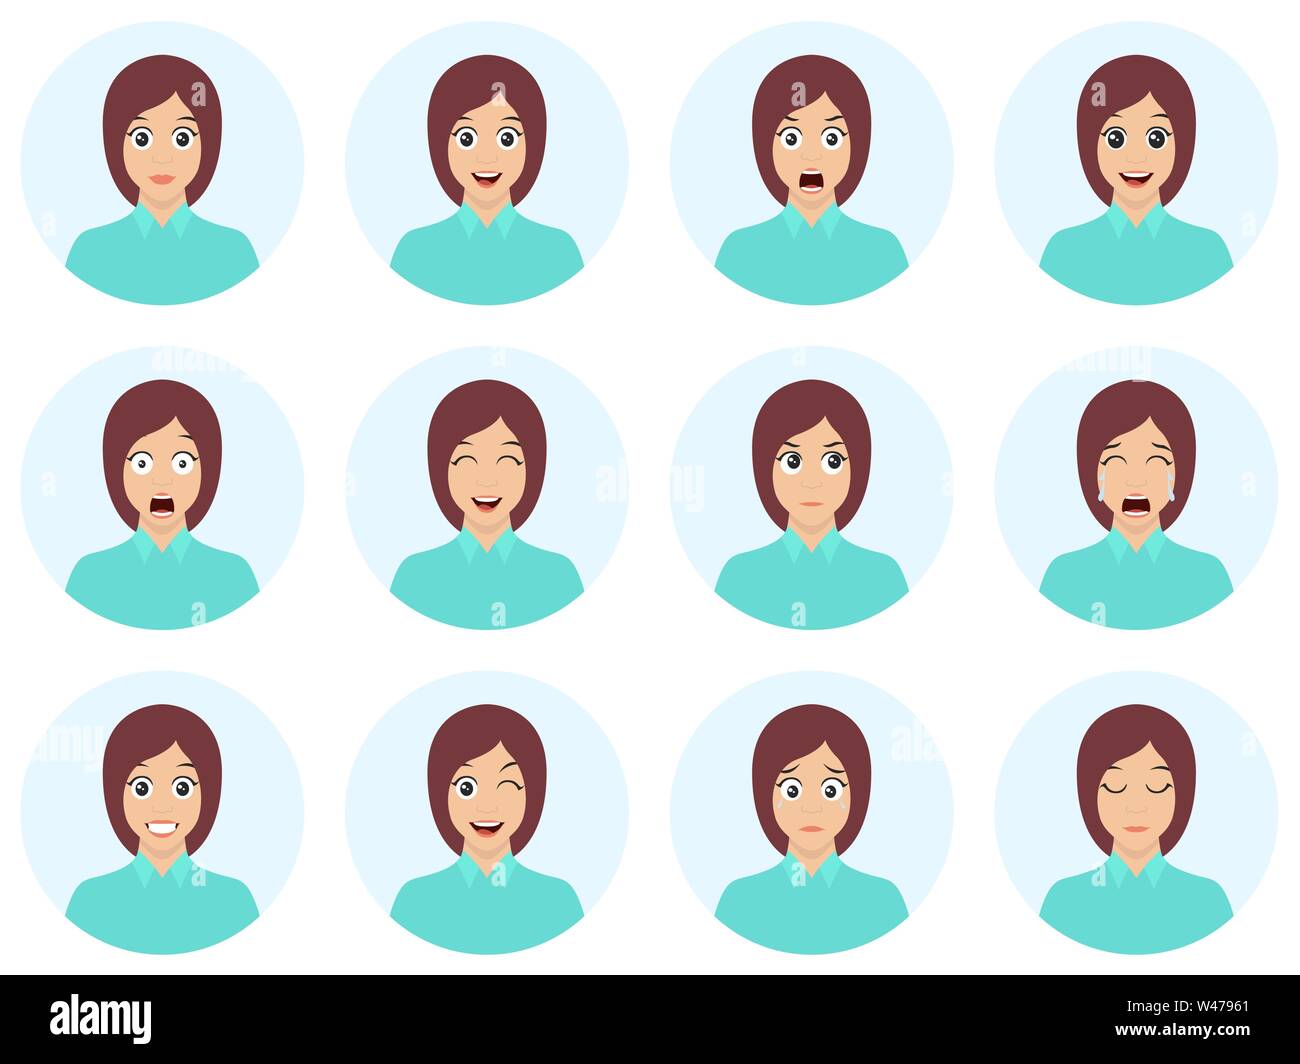 Set of woman's emotions. Cute brunette facial expression. Girl avatar. Flat design vector illustration of different facial expressions. Stock Vector